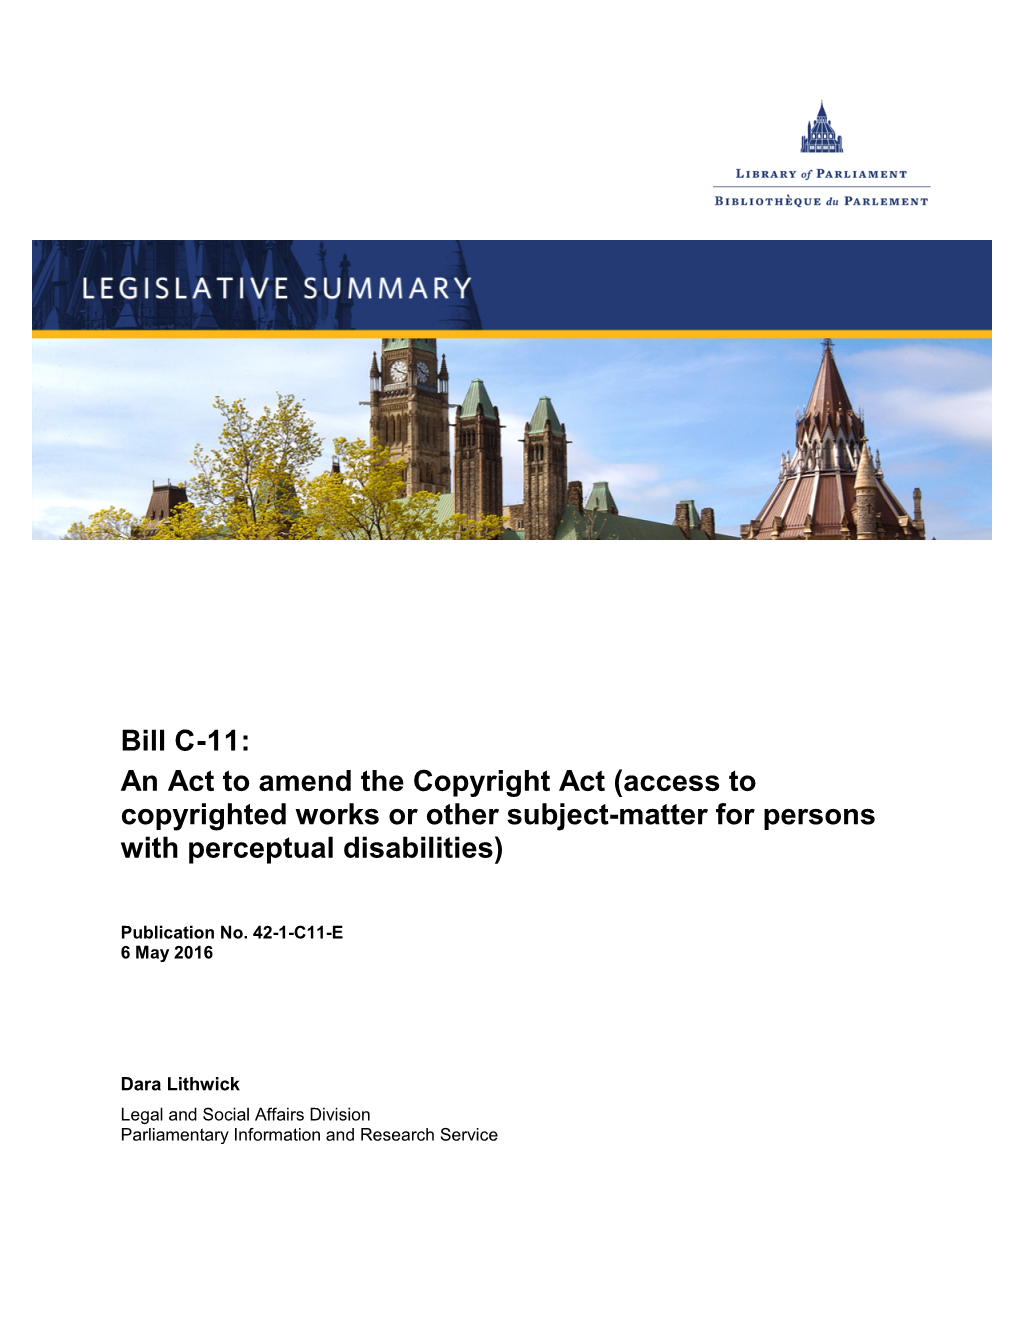 An Act to Amend the Copyright Act (Access to Copyrighted Works Or Other Subject-Matter for Persons with Perceptual Disabilities)